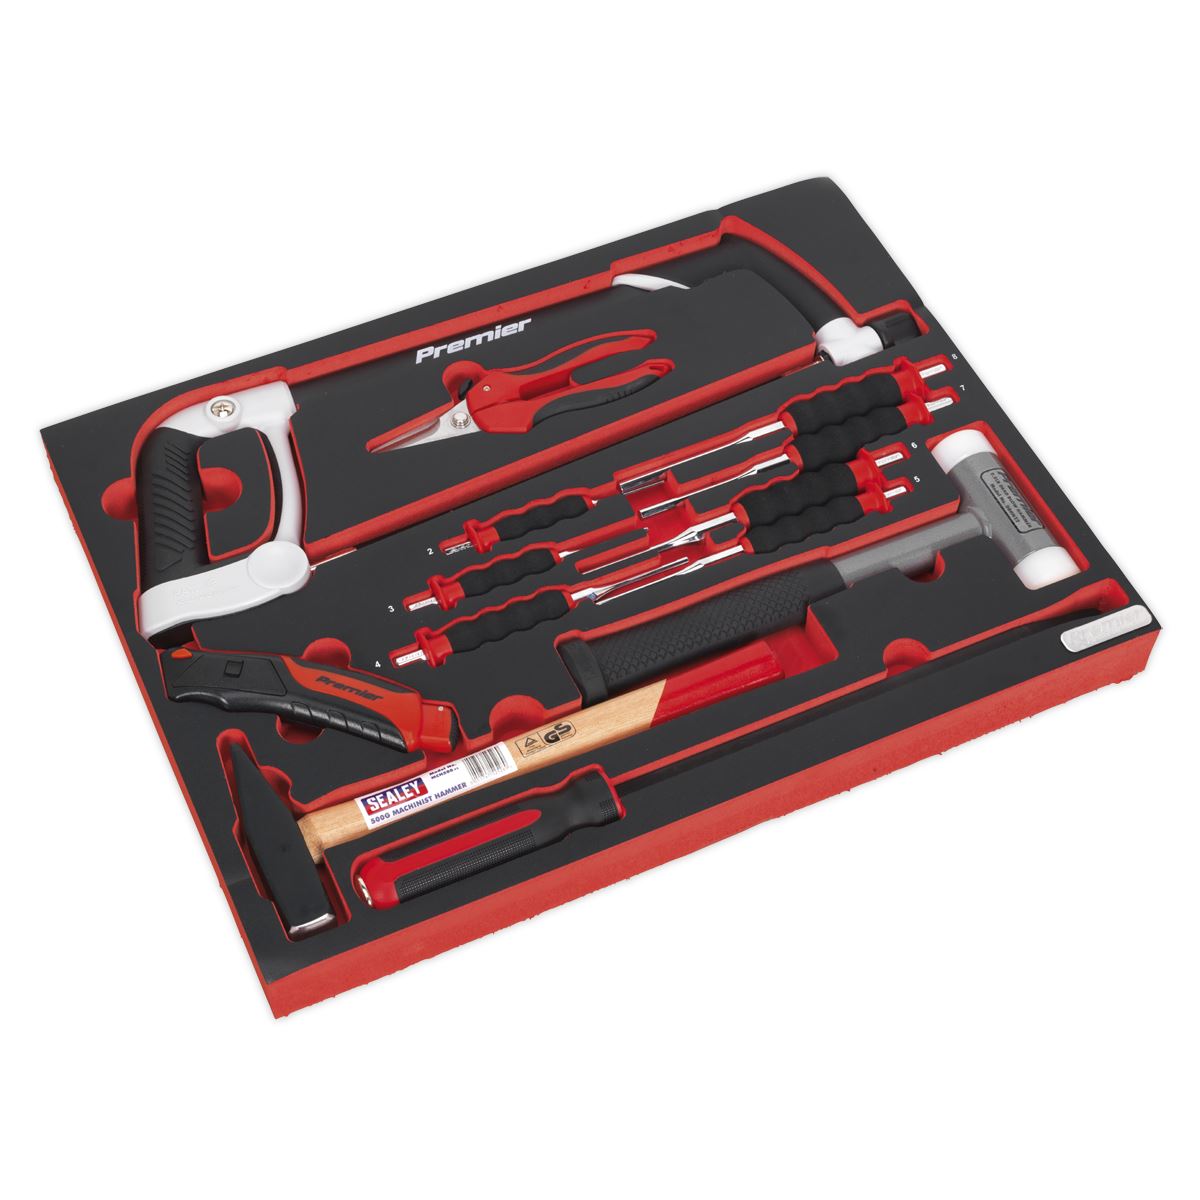 Sealey Premier Tool Tray with Hacksaw, Hammers & Punches 13pc